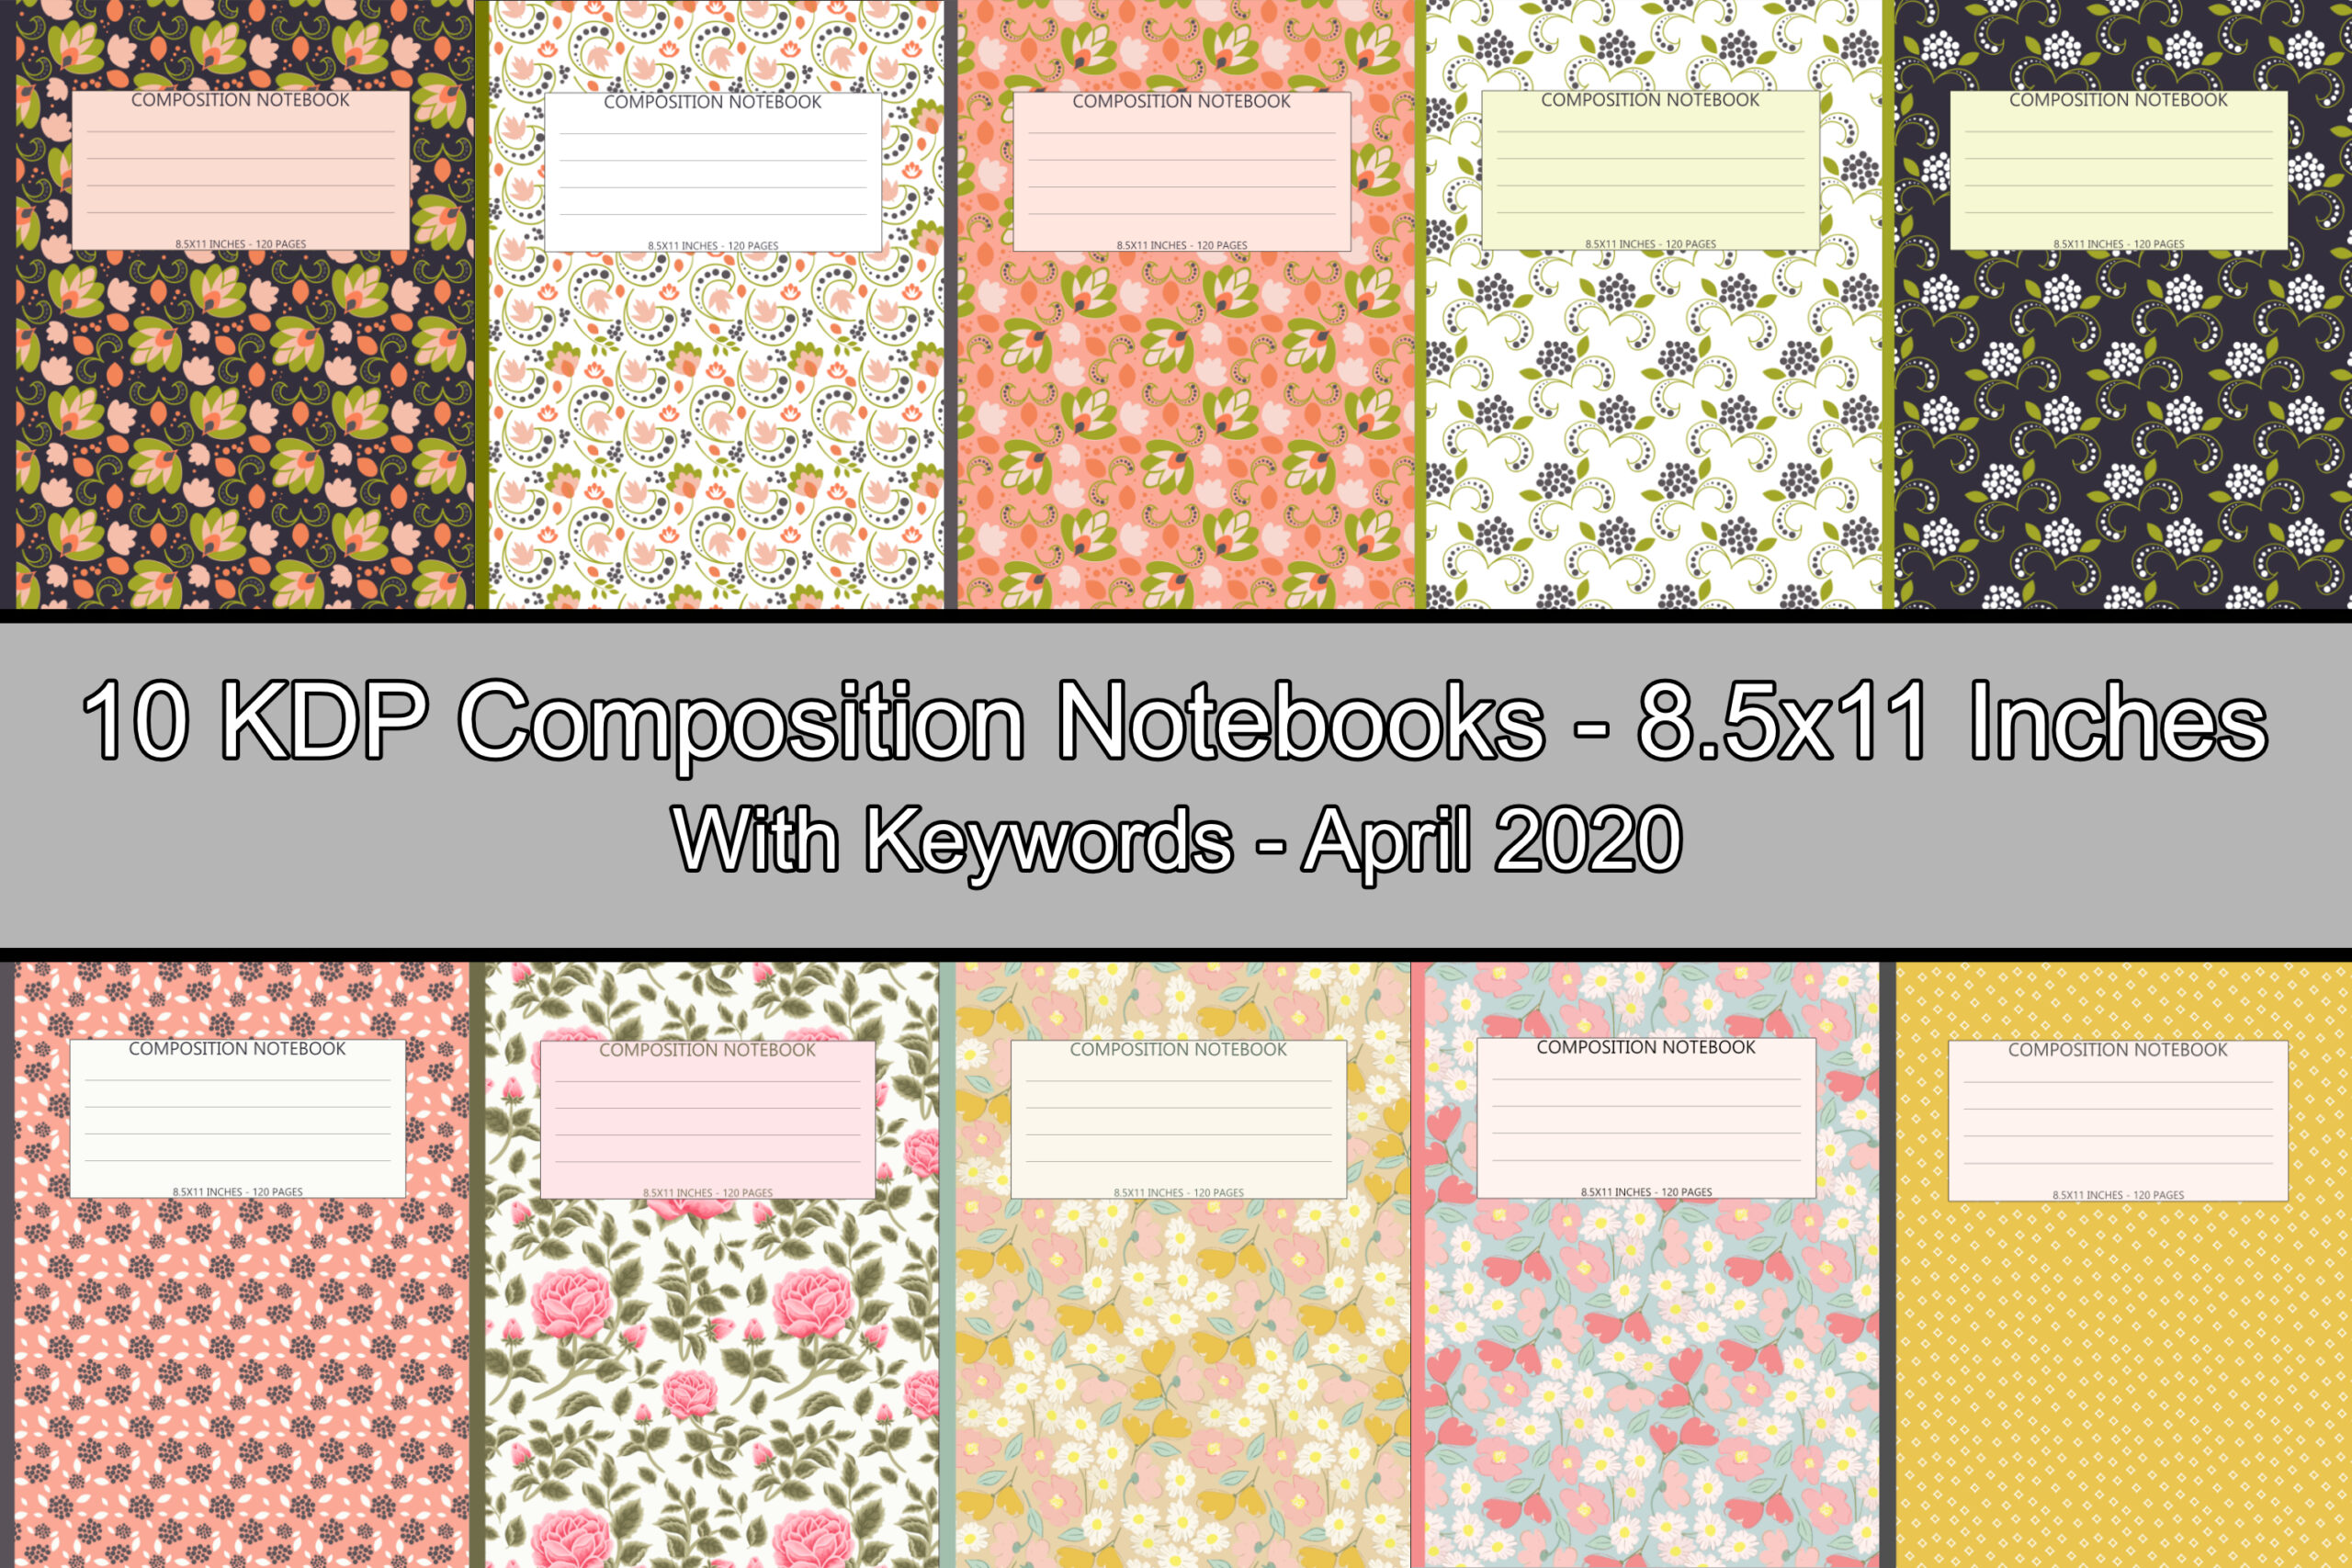 KDP notebook covers and keywords